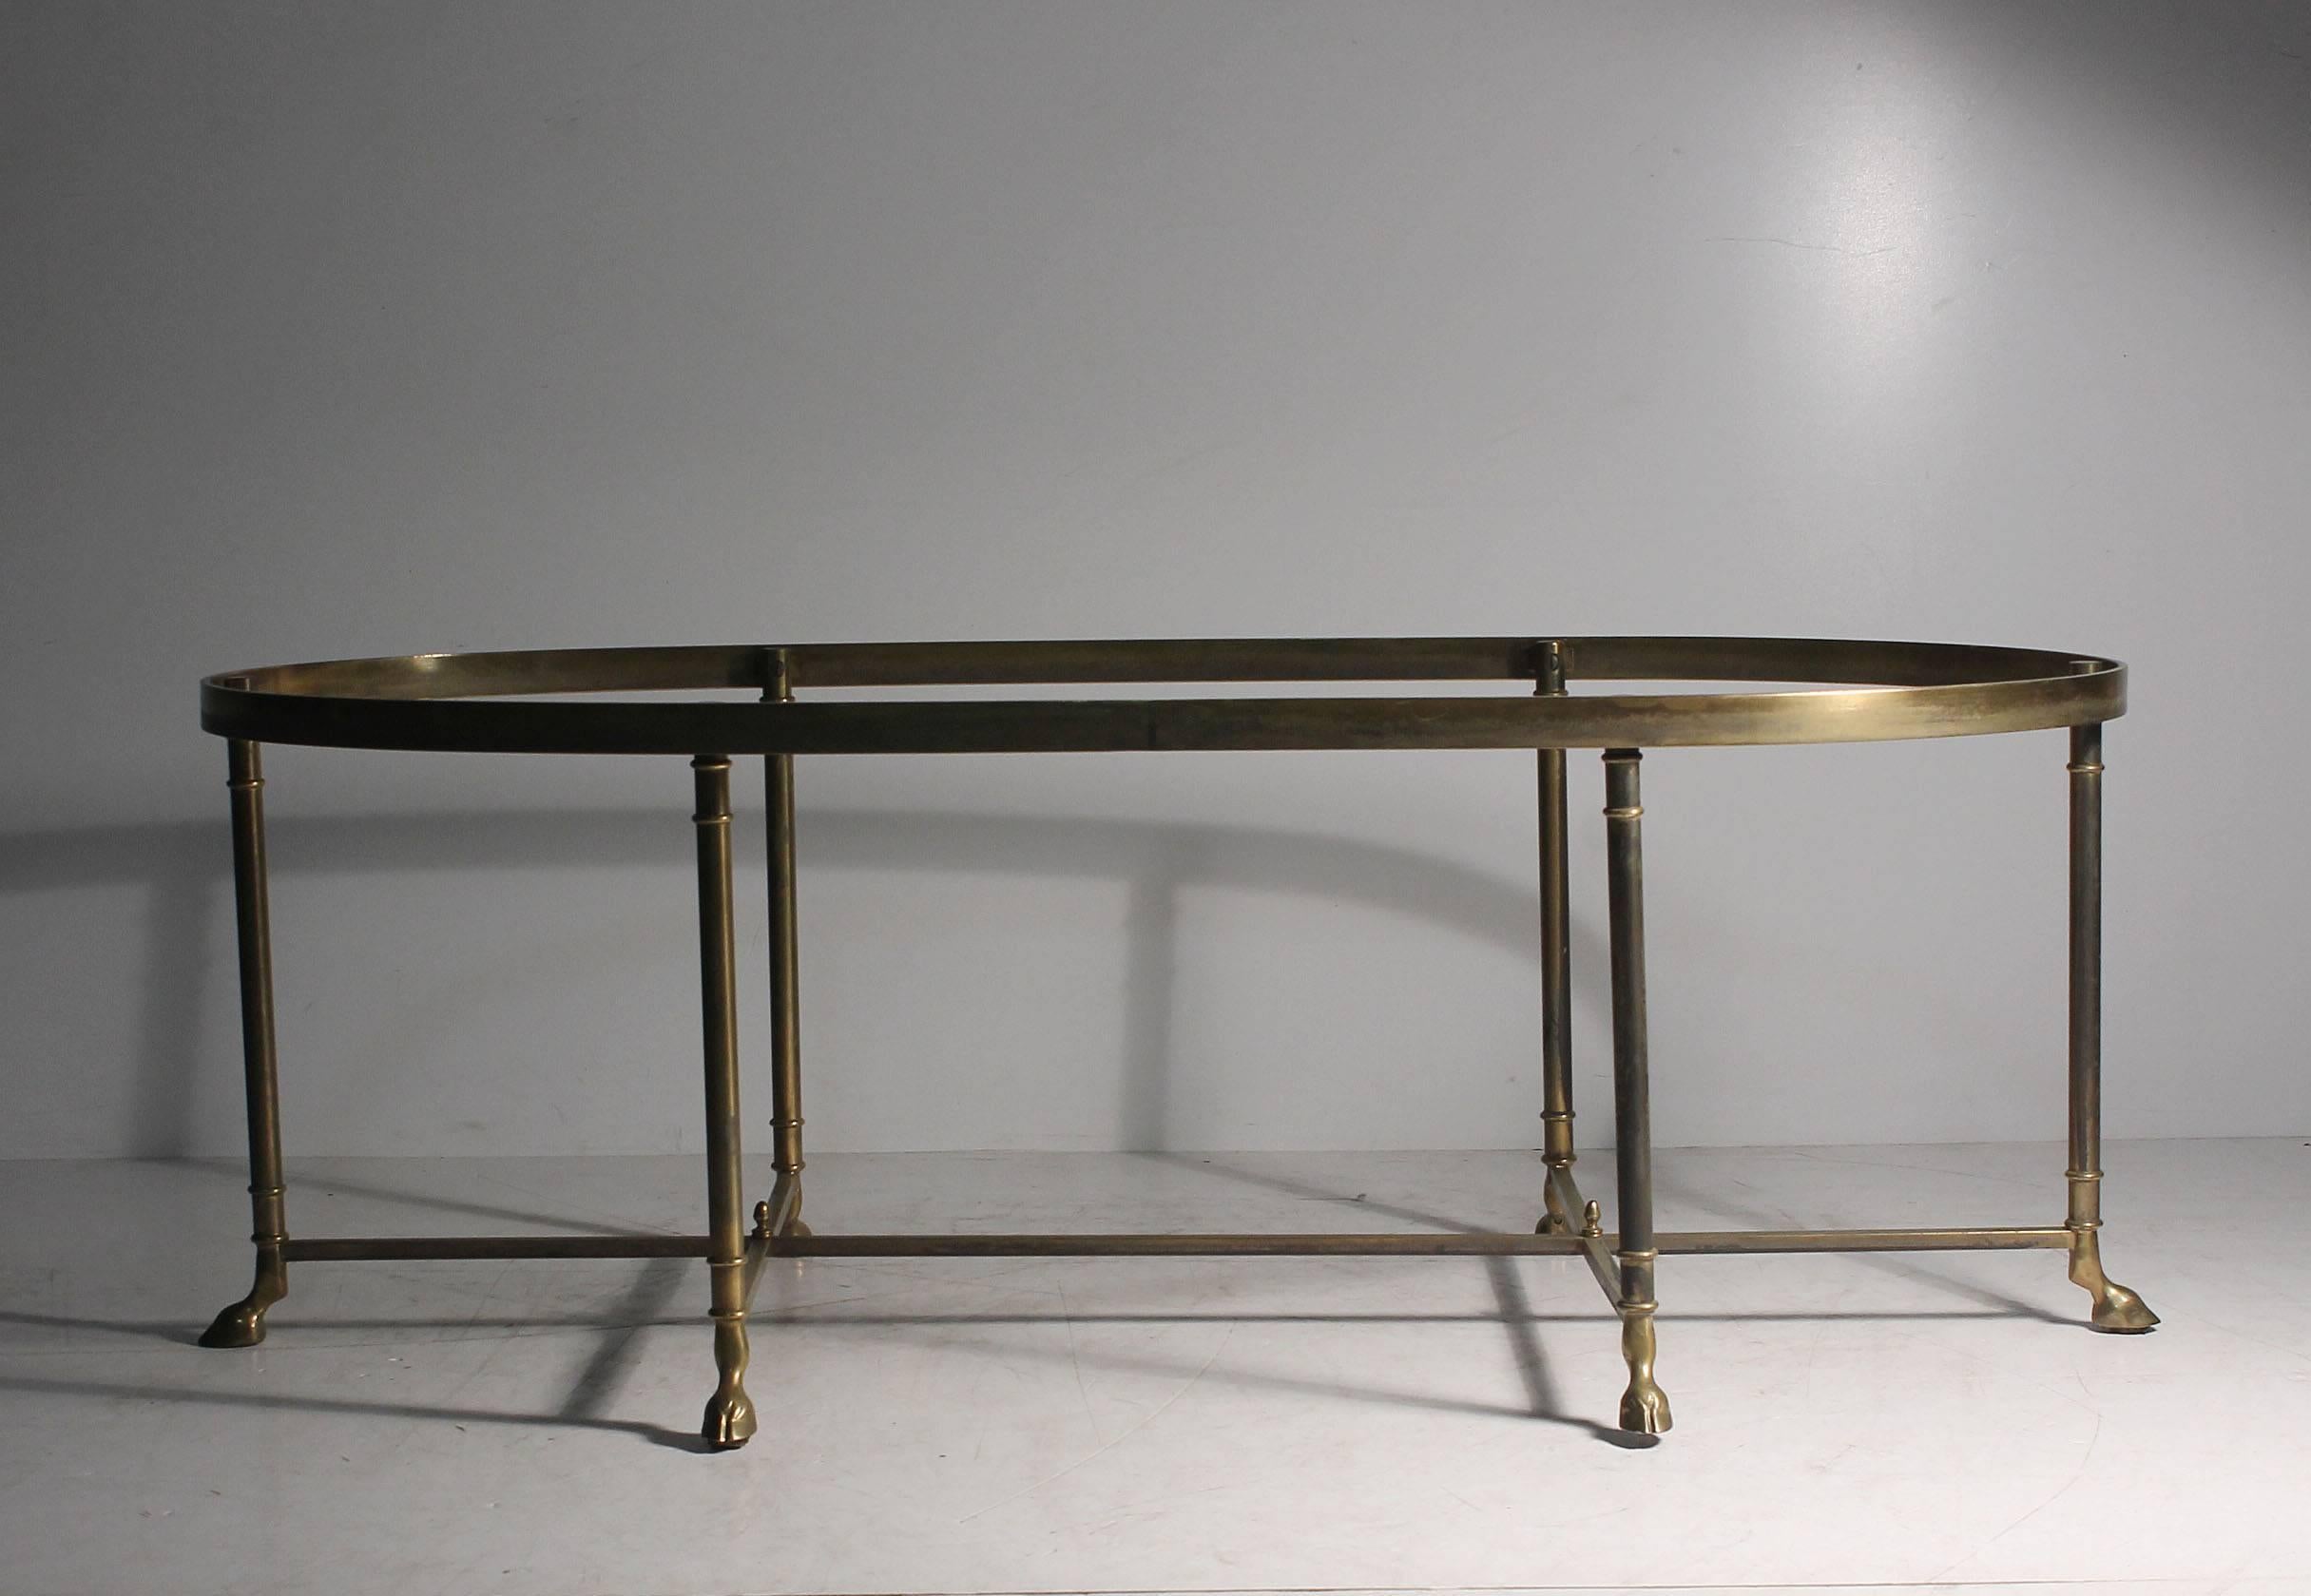 Vintage brass oval La Barge Hollywood Regency coffee table. These brass tables are extremely well-crafted and with a fine French design feel. In the manner of Maison Jansen.

Brass is in vintage condition with a nicely aged look. Structurally